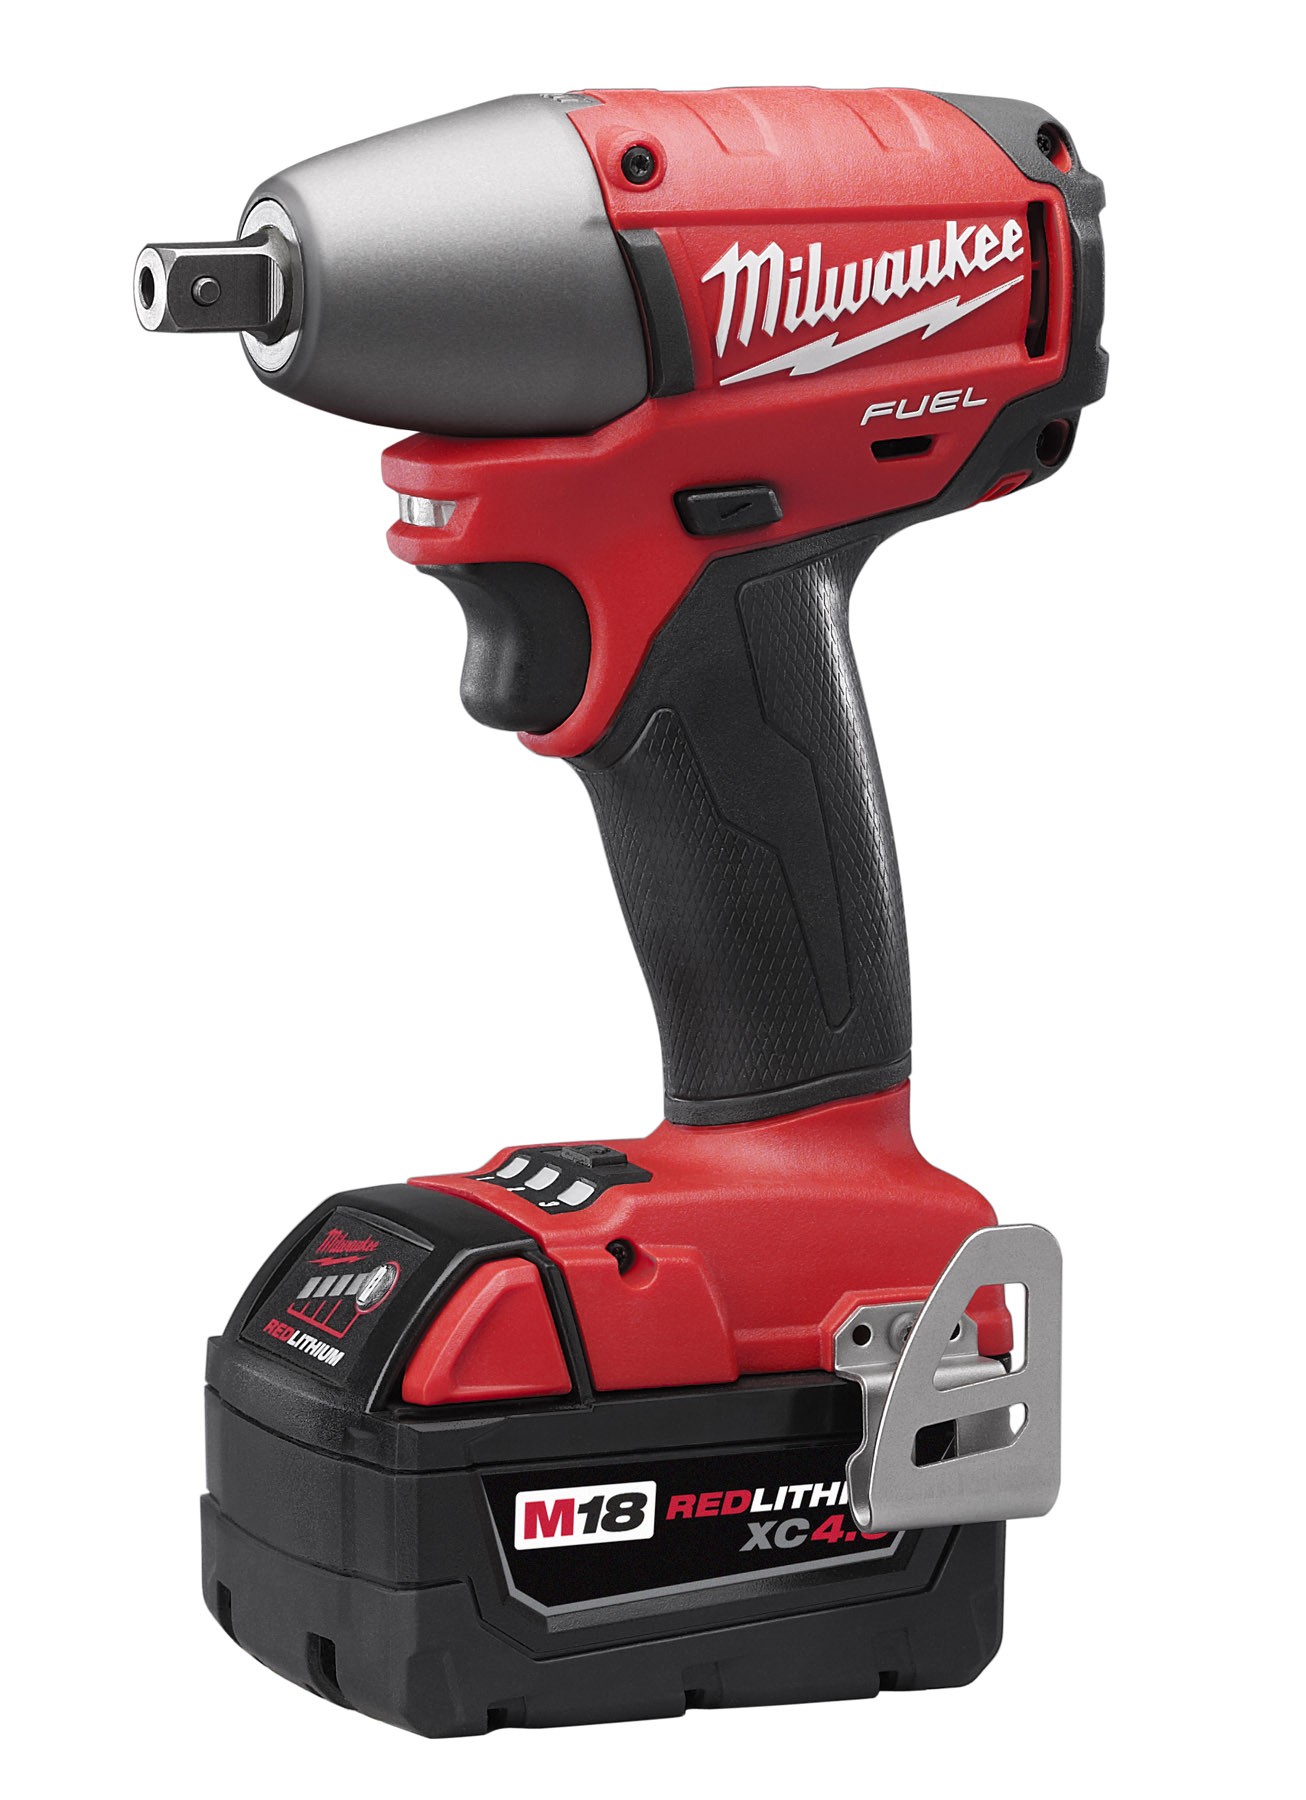 Milwaukee's New M18 Fuel Compact Impact Wrench Tools In Action Power  Tool Reviews